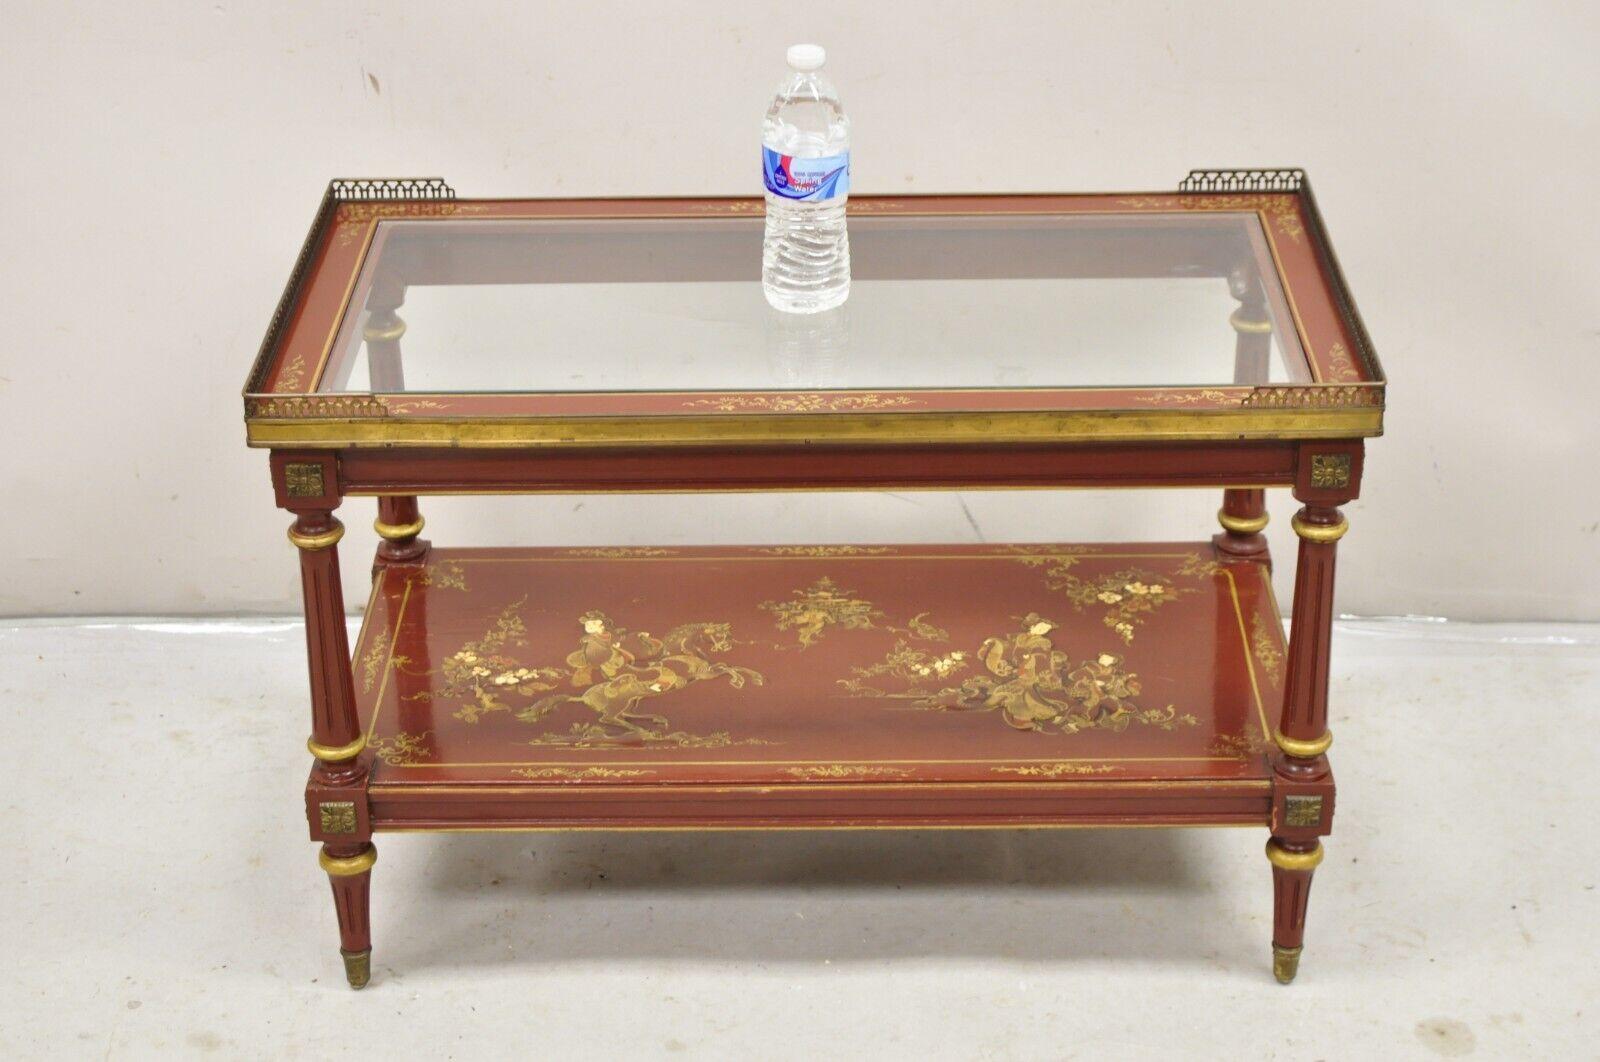 Vintage Chinoiserie Red Lacquer Gold Gilt Oriental / Asian Inspired Hand Painted Glass Top Coffee Table. Item features 2 tiers, unique painted details, brass ormolu and gallery, very nice vintage coffee table. Circa Early to Mid 20th Century.